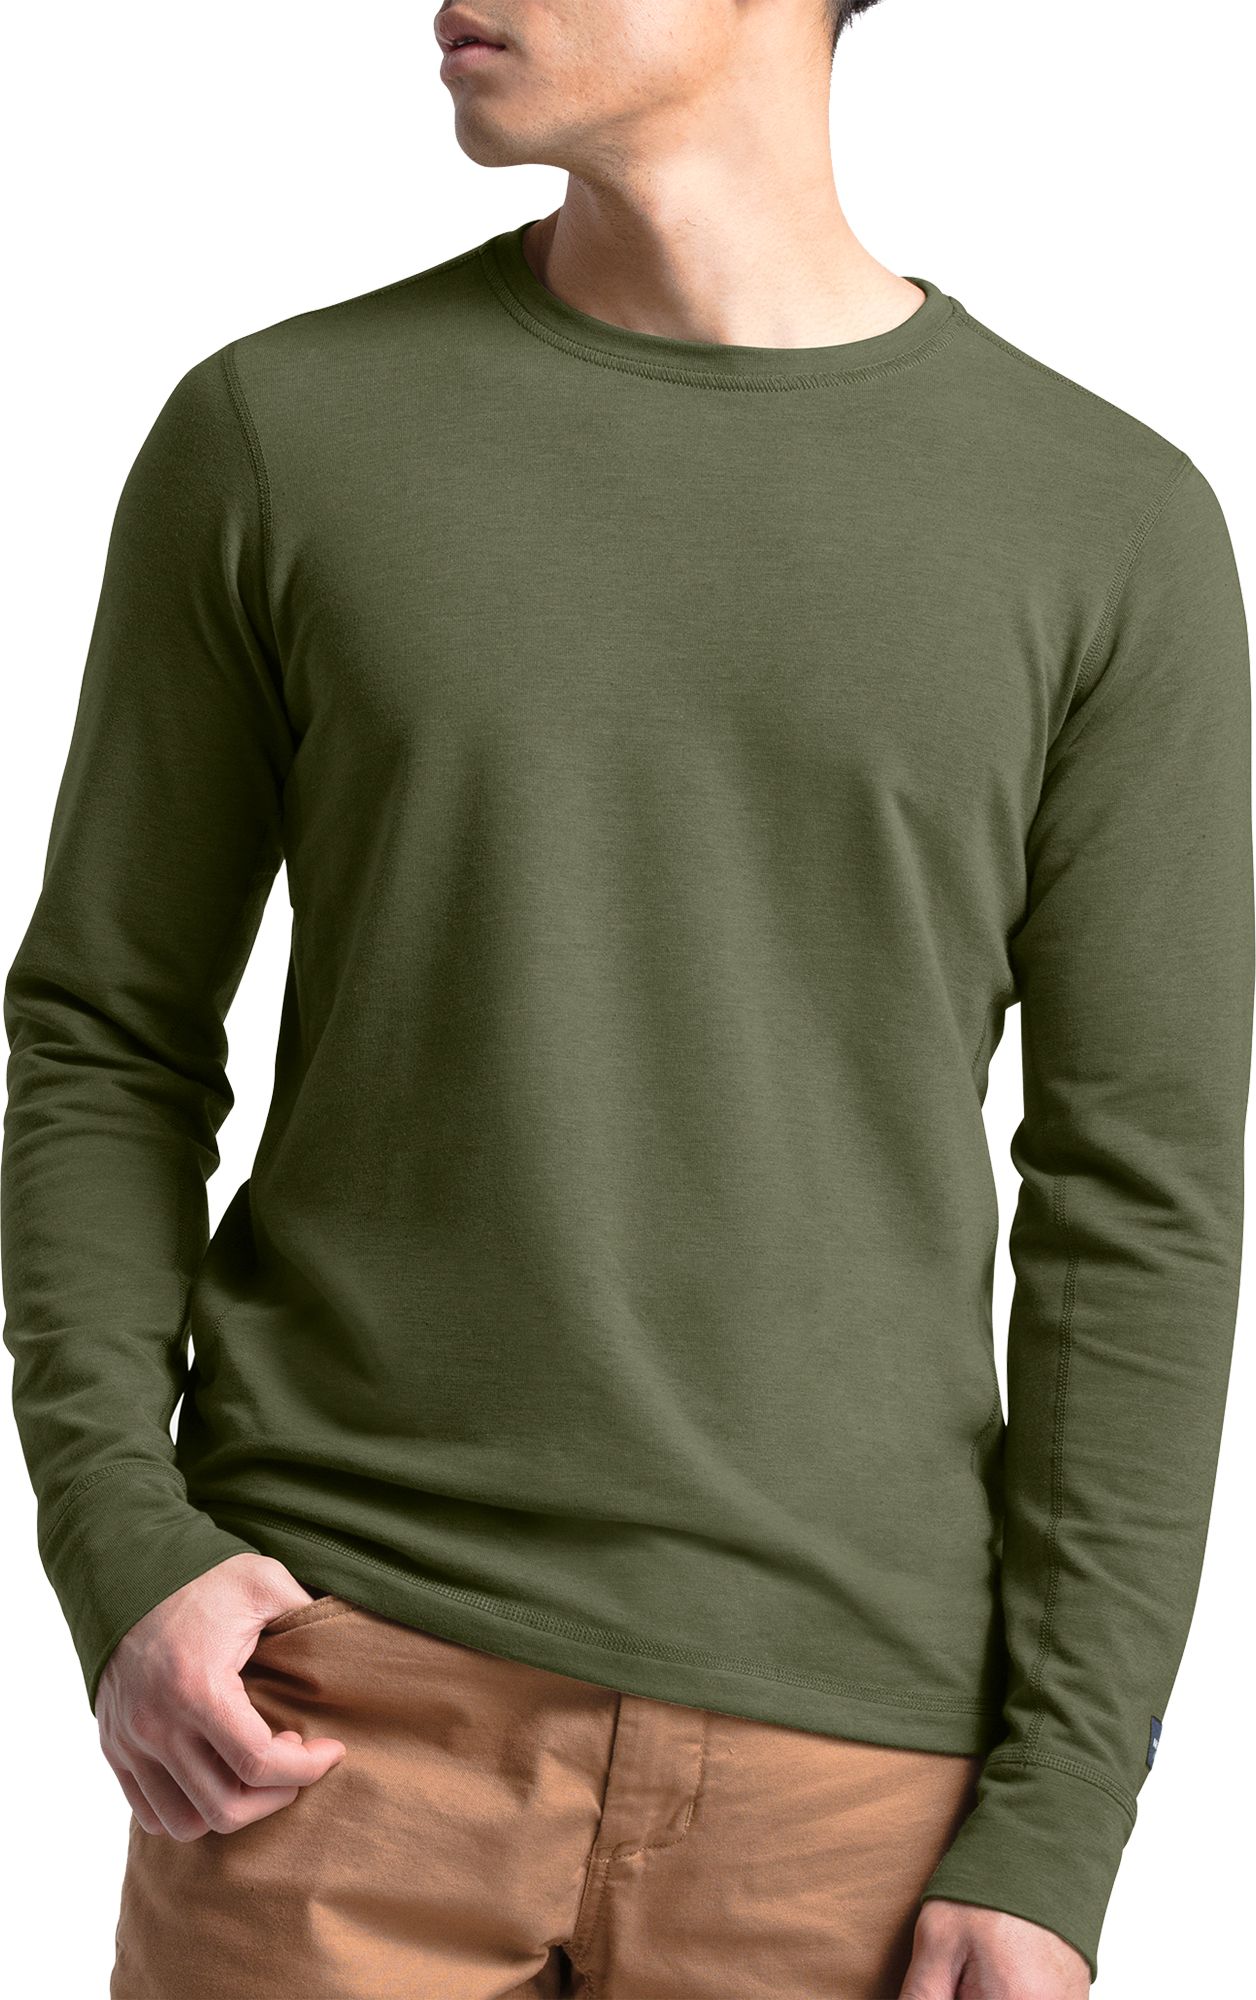 The North Face Men's Long Sleeve Terry Crew Shirt - .97 - .97